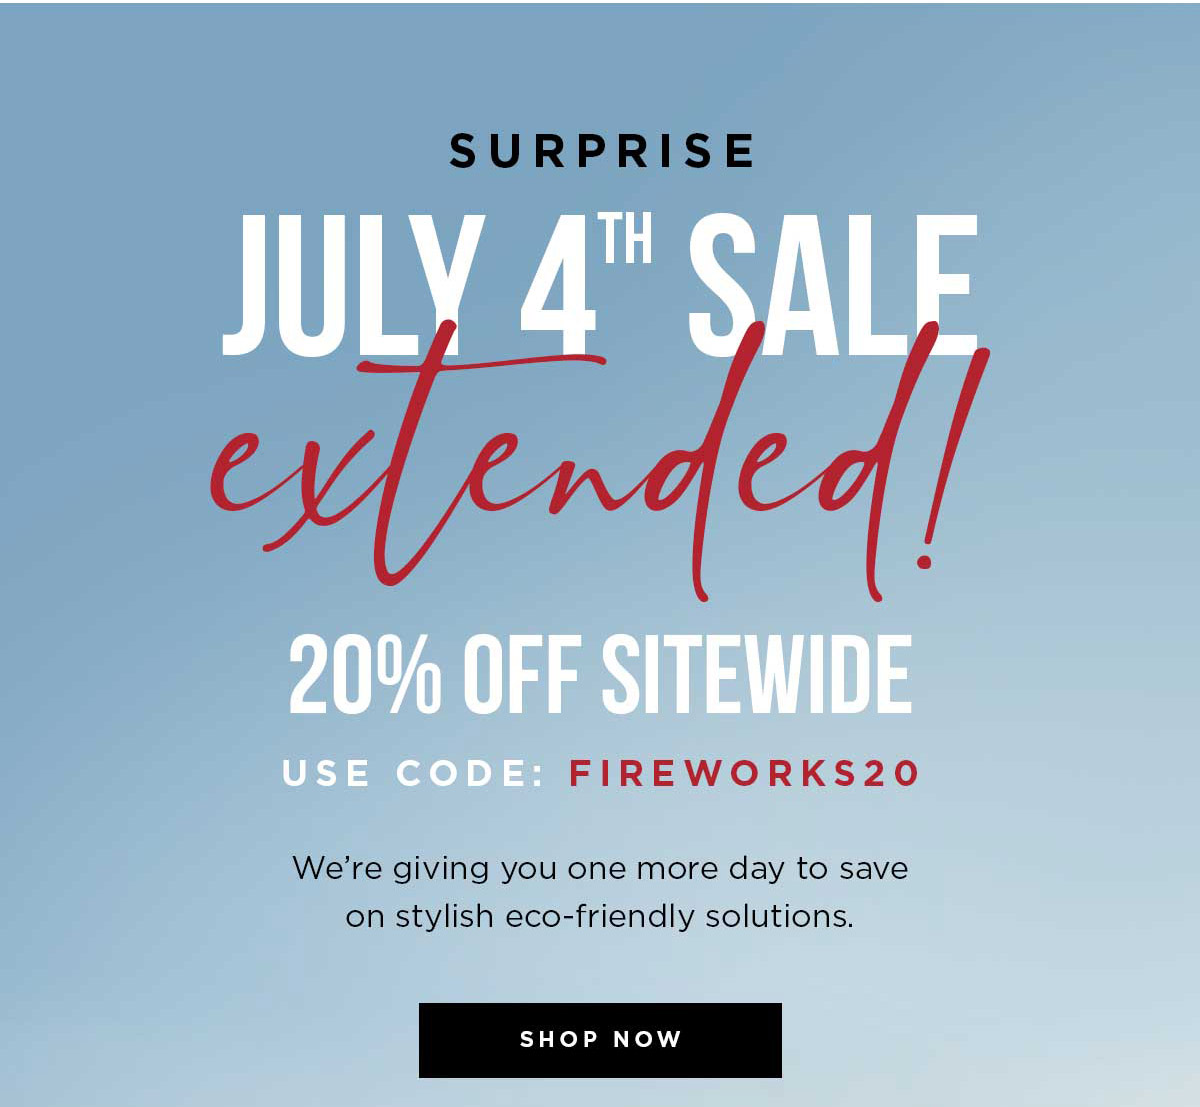 SURPRISE - JULY 4TH SALE EXTENDED! 20% OFF SITEWIDE USE CODE: FIREWORKS20 - SHOP NOW